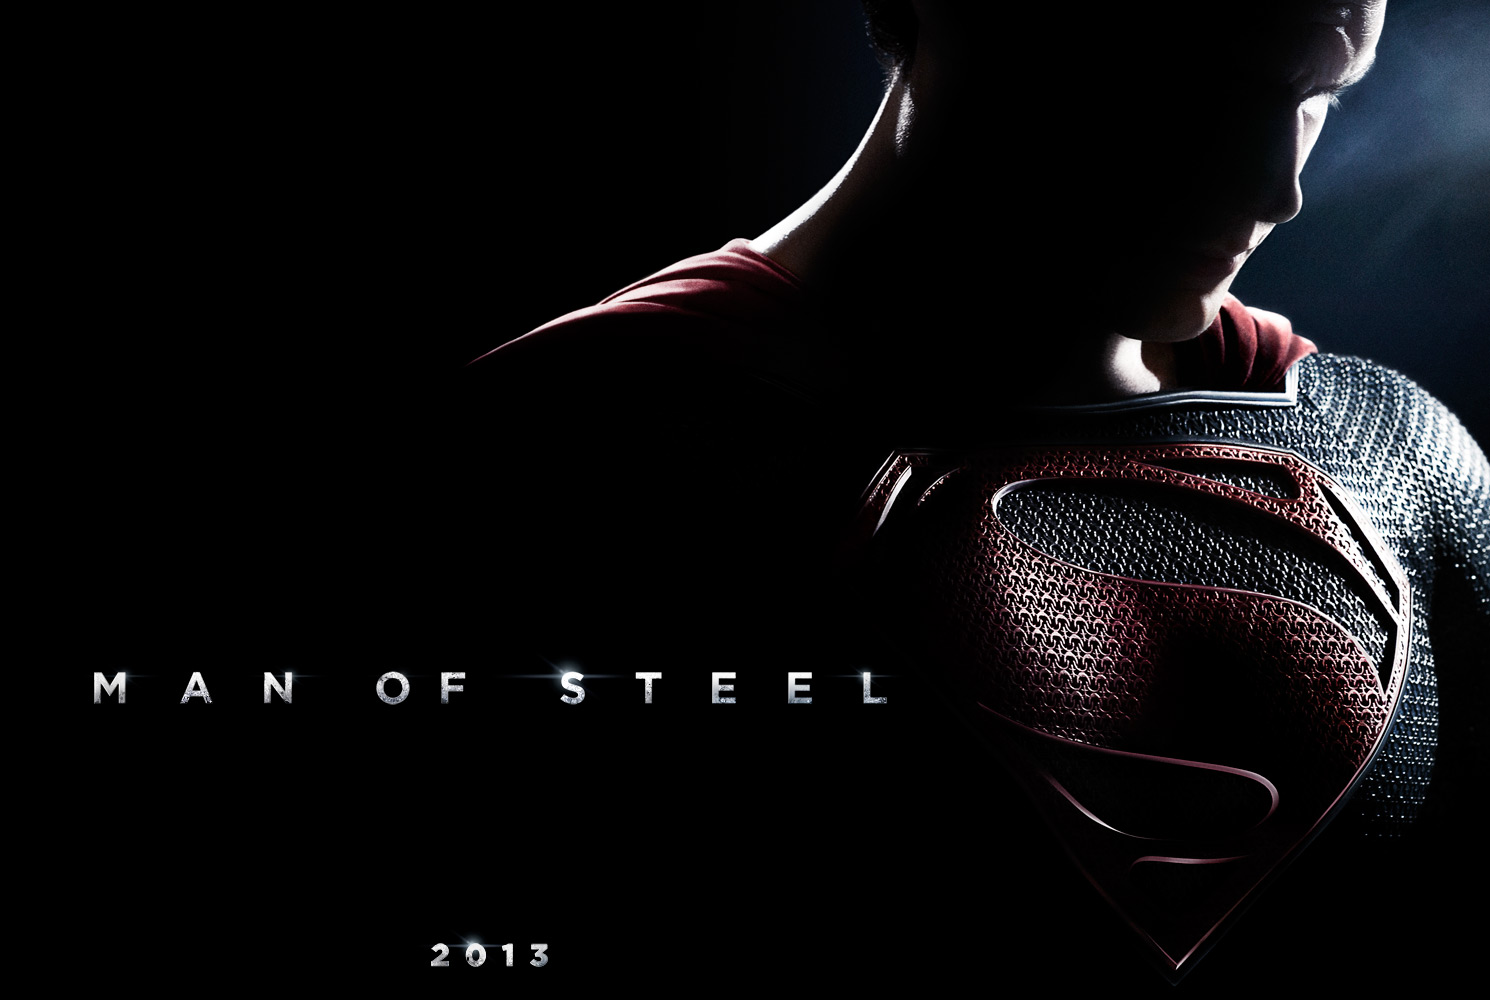 Movie News: New Man of Steel pics come out